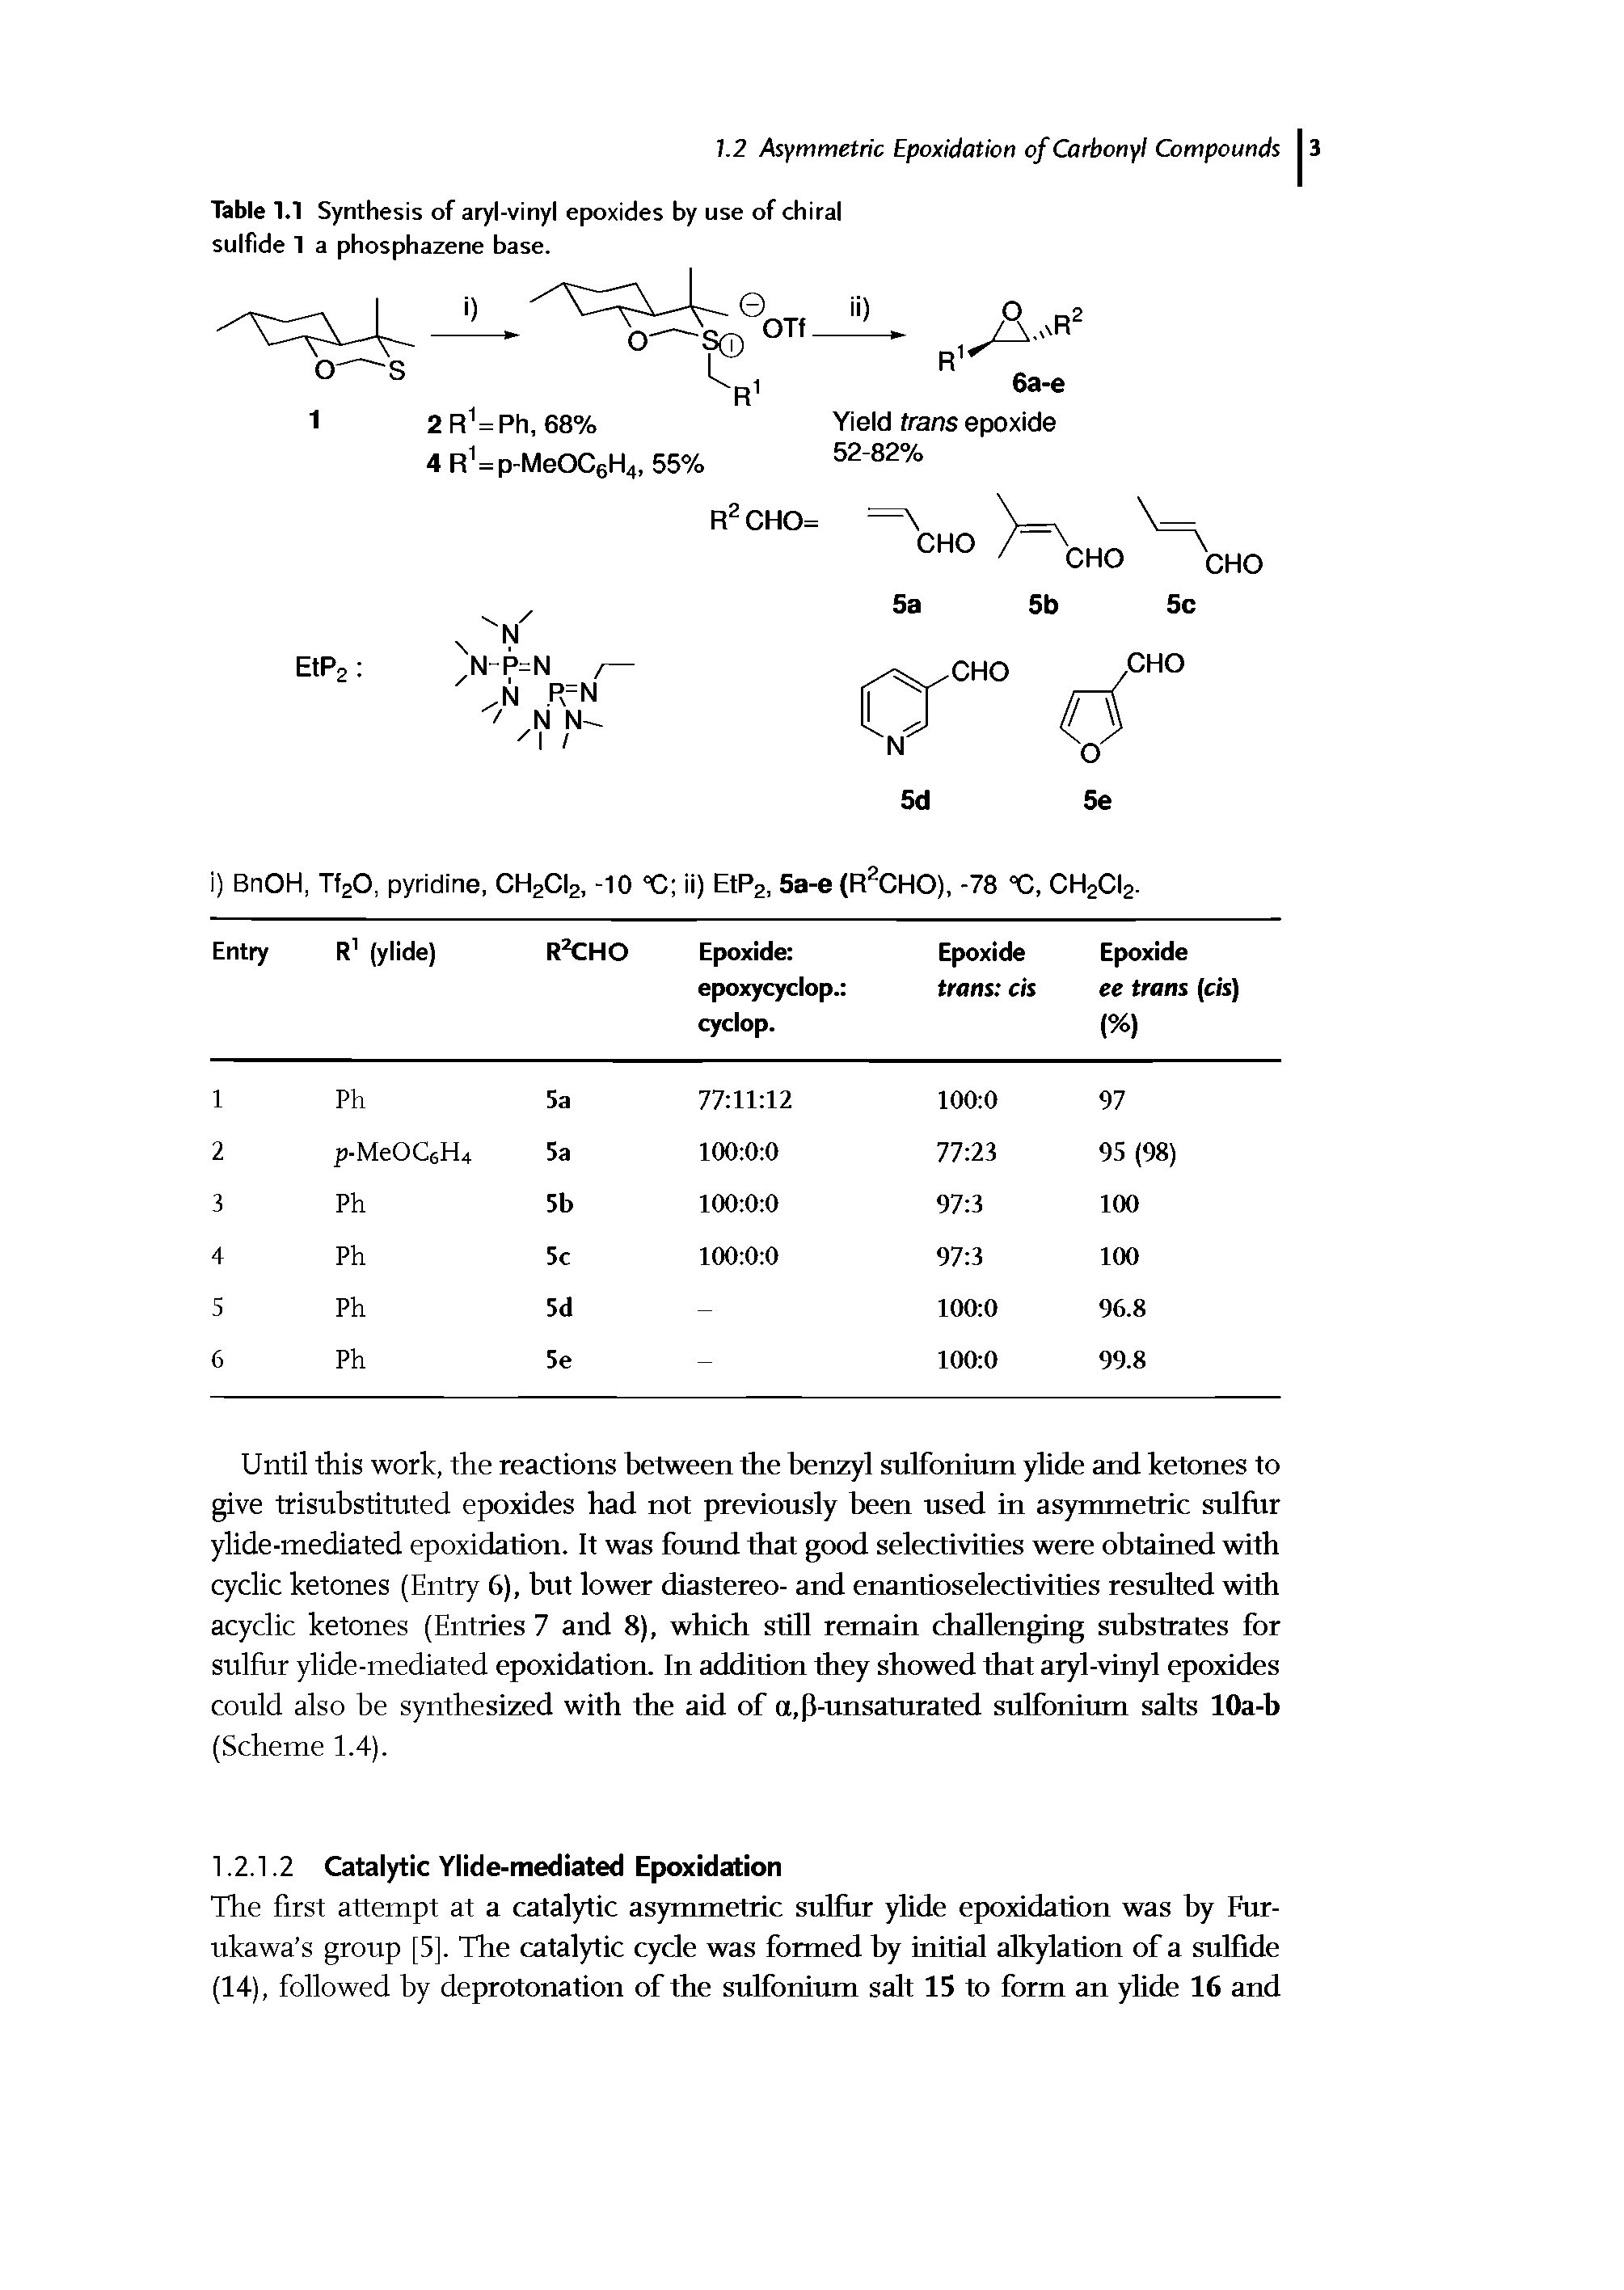 Table 1.1 Synthesis of aryl-vinyl epoxides by use of chiral sulfide 1 a phosphazene base.